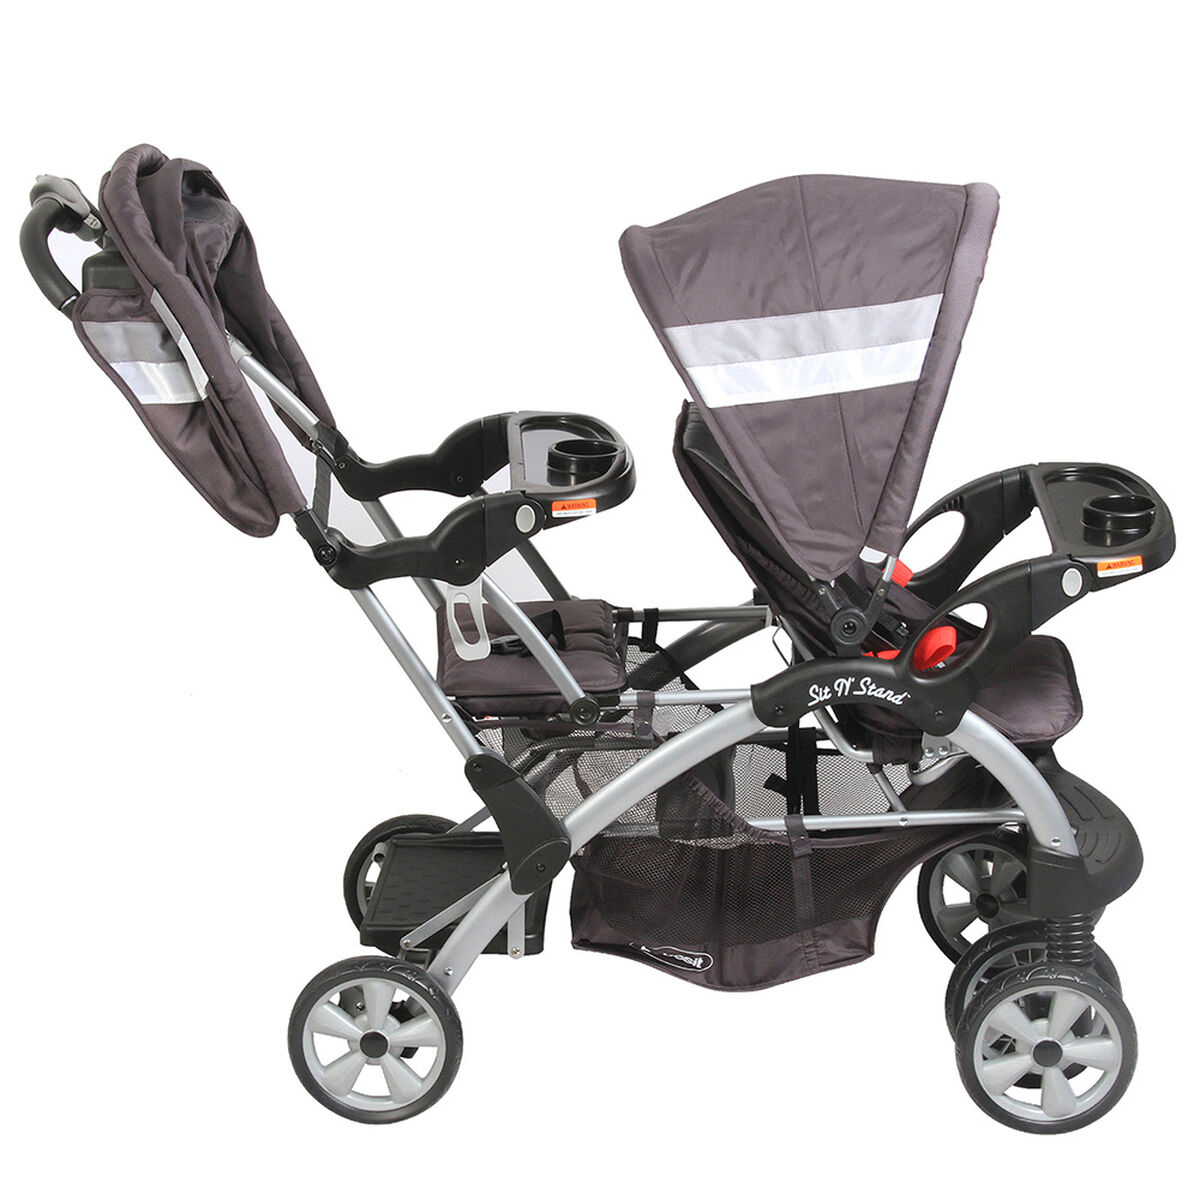 Coche Doble de Paseo Bebesit 8096 Sit And Stand